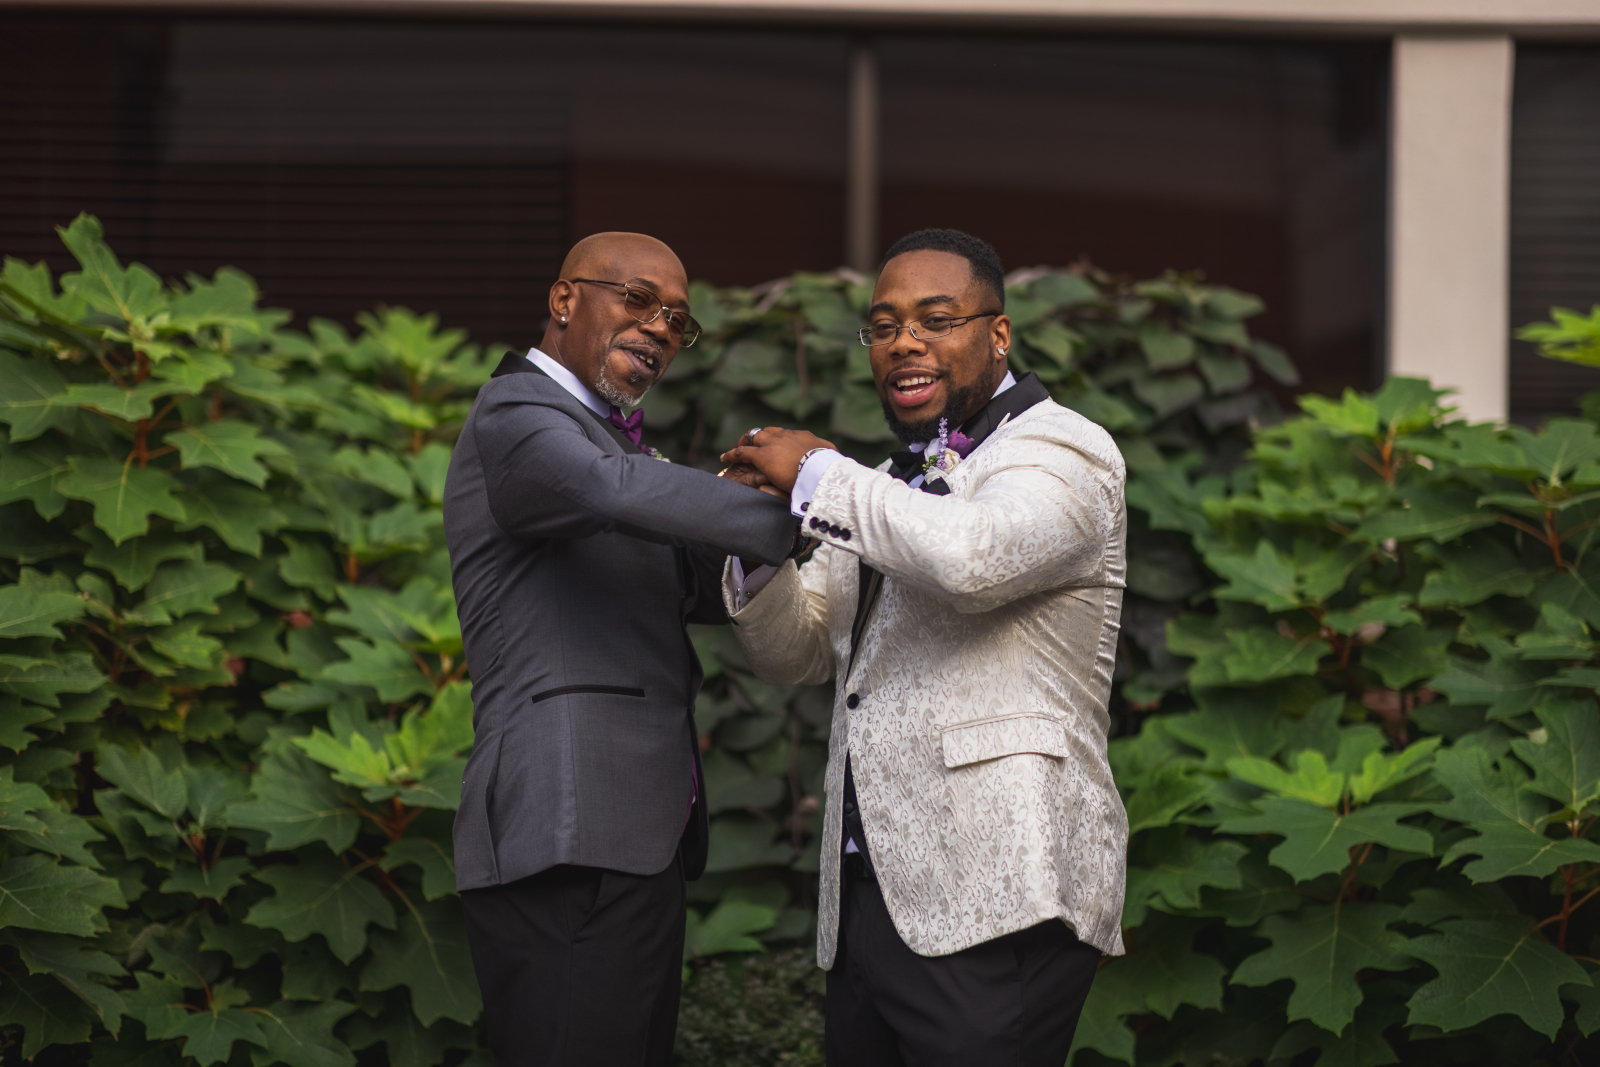 Groom and father, parent of the groom, bridal party portrait, fun bridal party portrait, green bushes, nature, African American groom, African American wedding, romantic wedding ceremony at Hilton Akron/Fairlawn